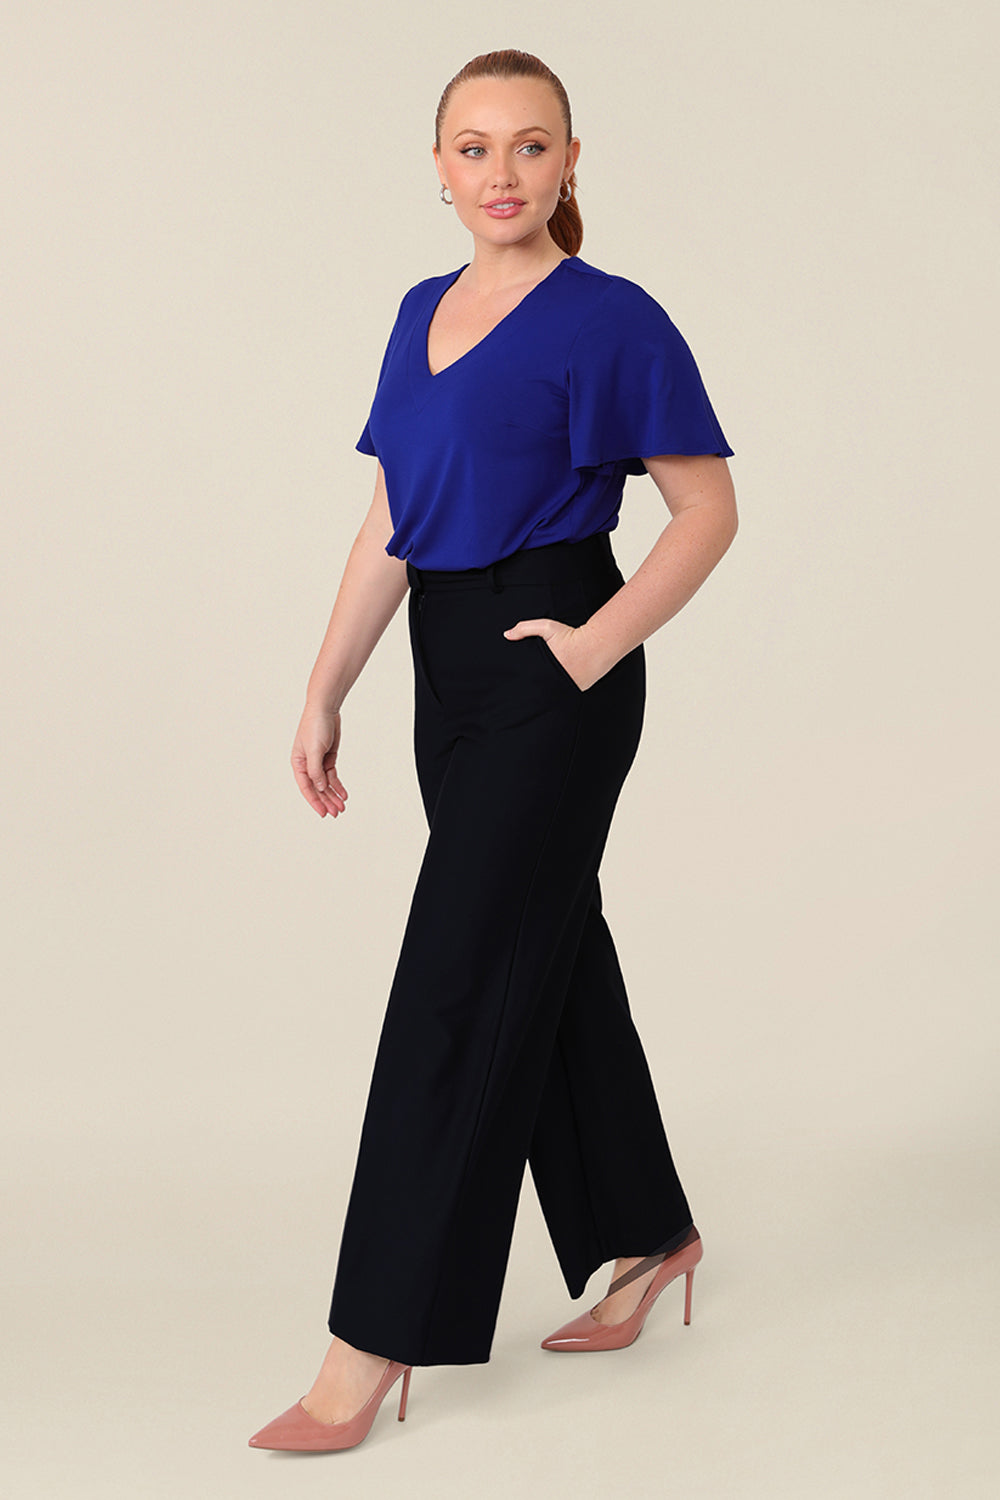 A size 12 curvy woman wears a blue bamboo jersey top with a V-neck and short flutter sleeves. It is a lightweight and breathable top thanks to its natural and sustainable bamboo fibres, and being made in Australia, it is part of L&Fs move towards greater sustainability and eco-conscious fashion. Styled with a navy wide leg pant, perfect for work wear.